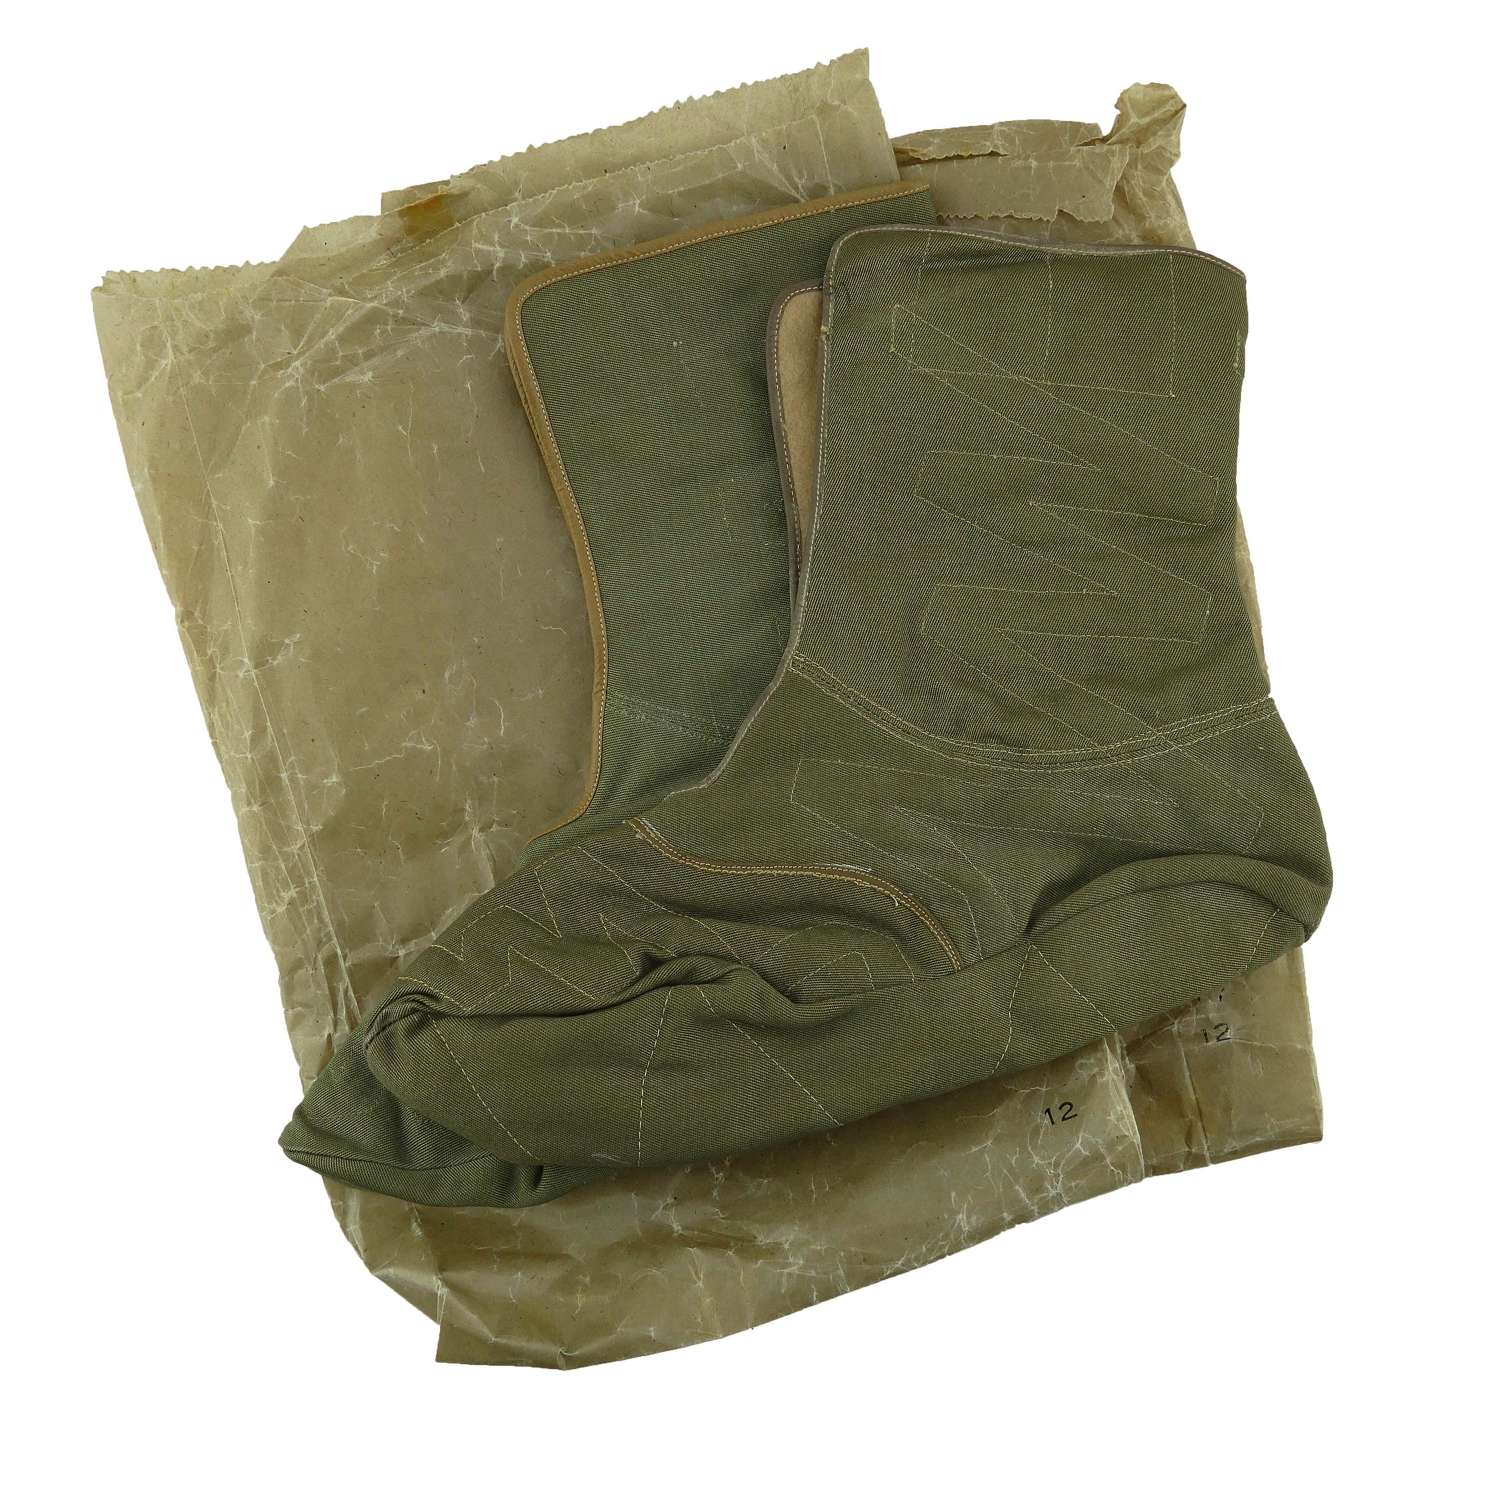 RAF bootees, electrically heated, type H